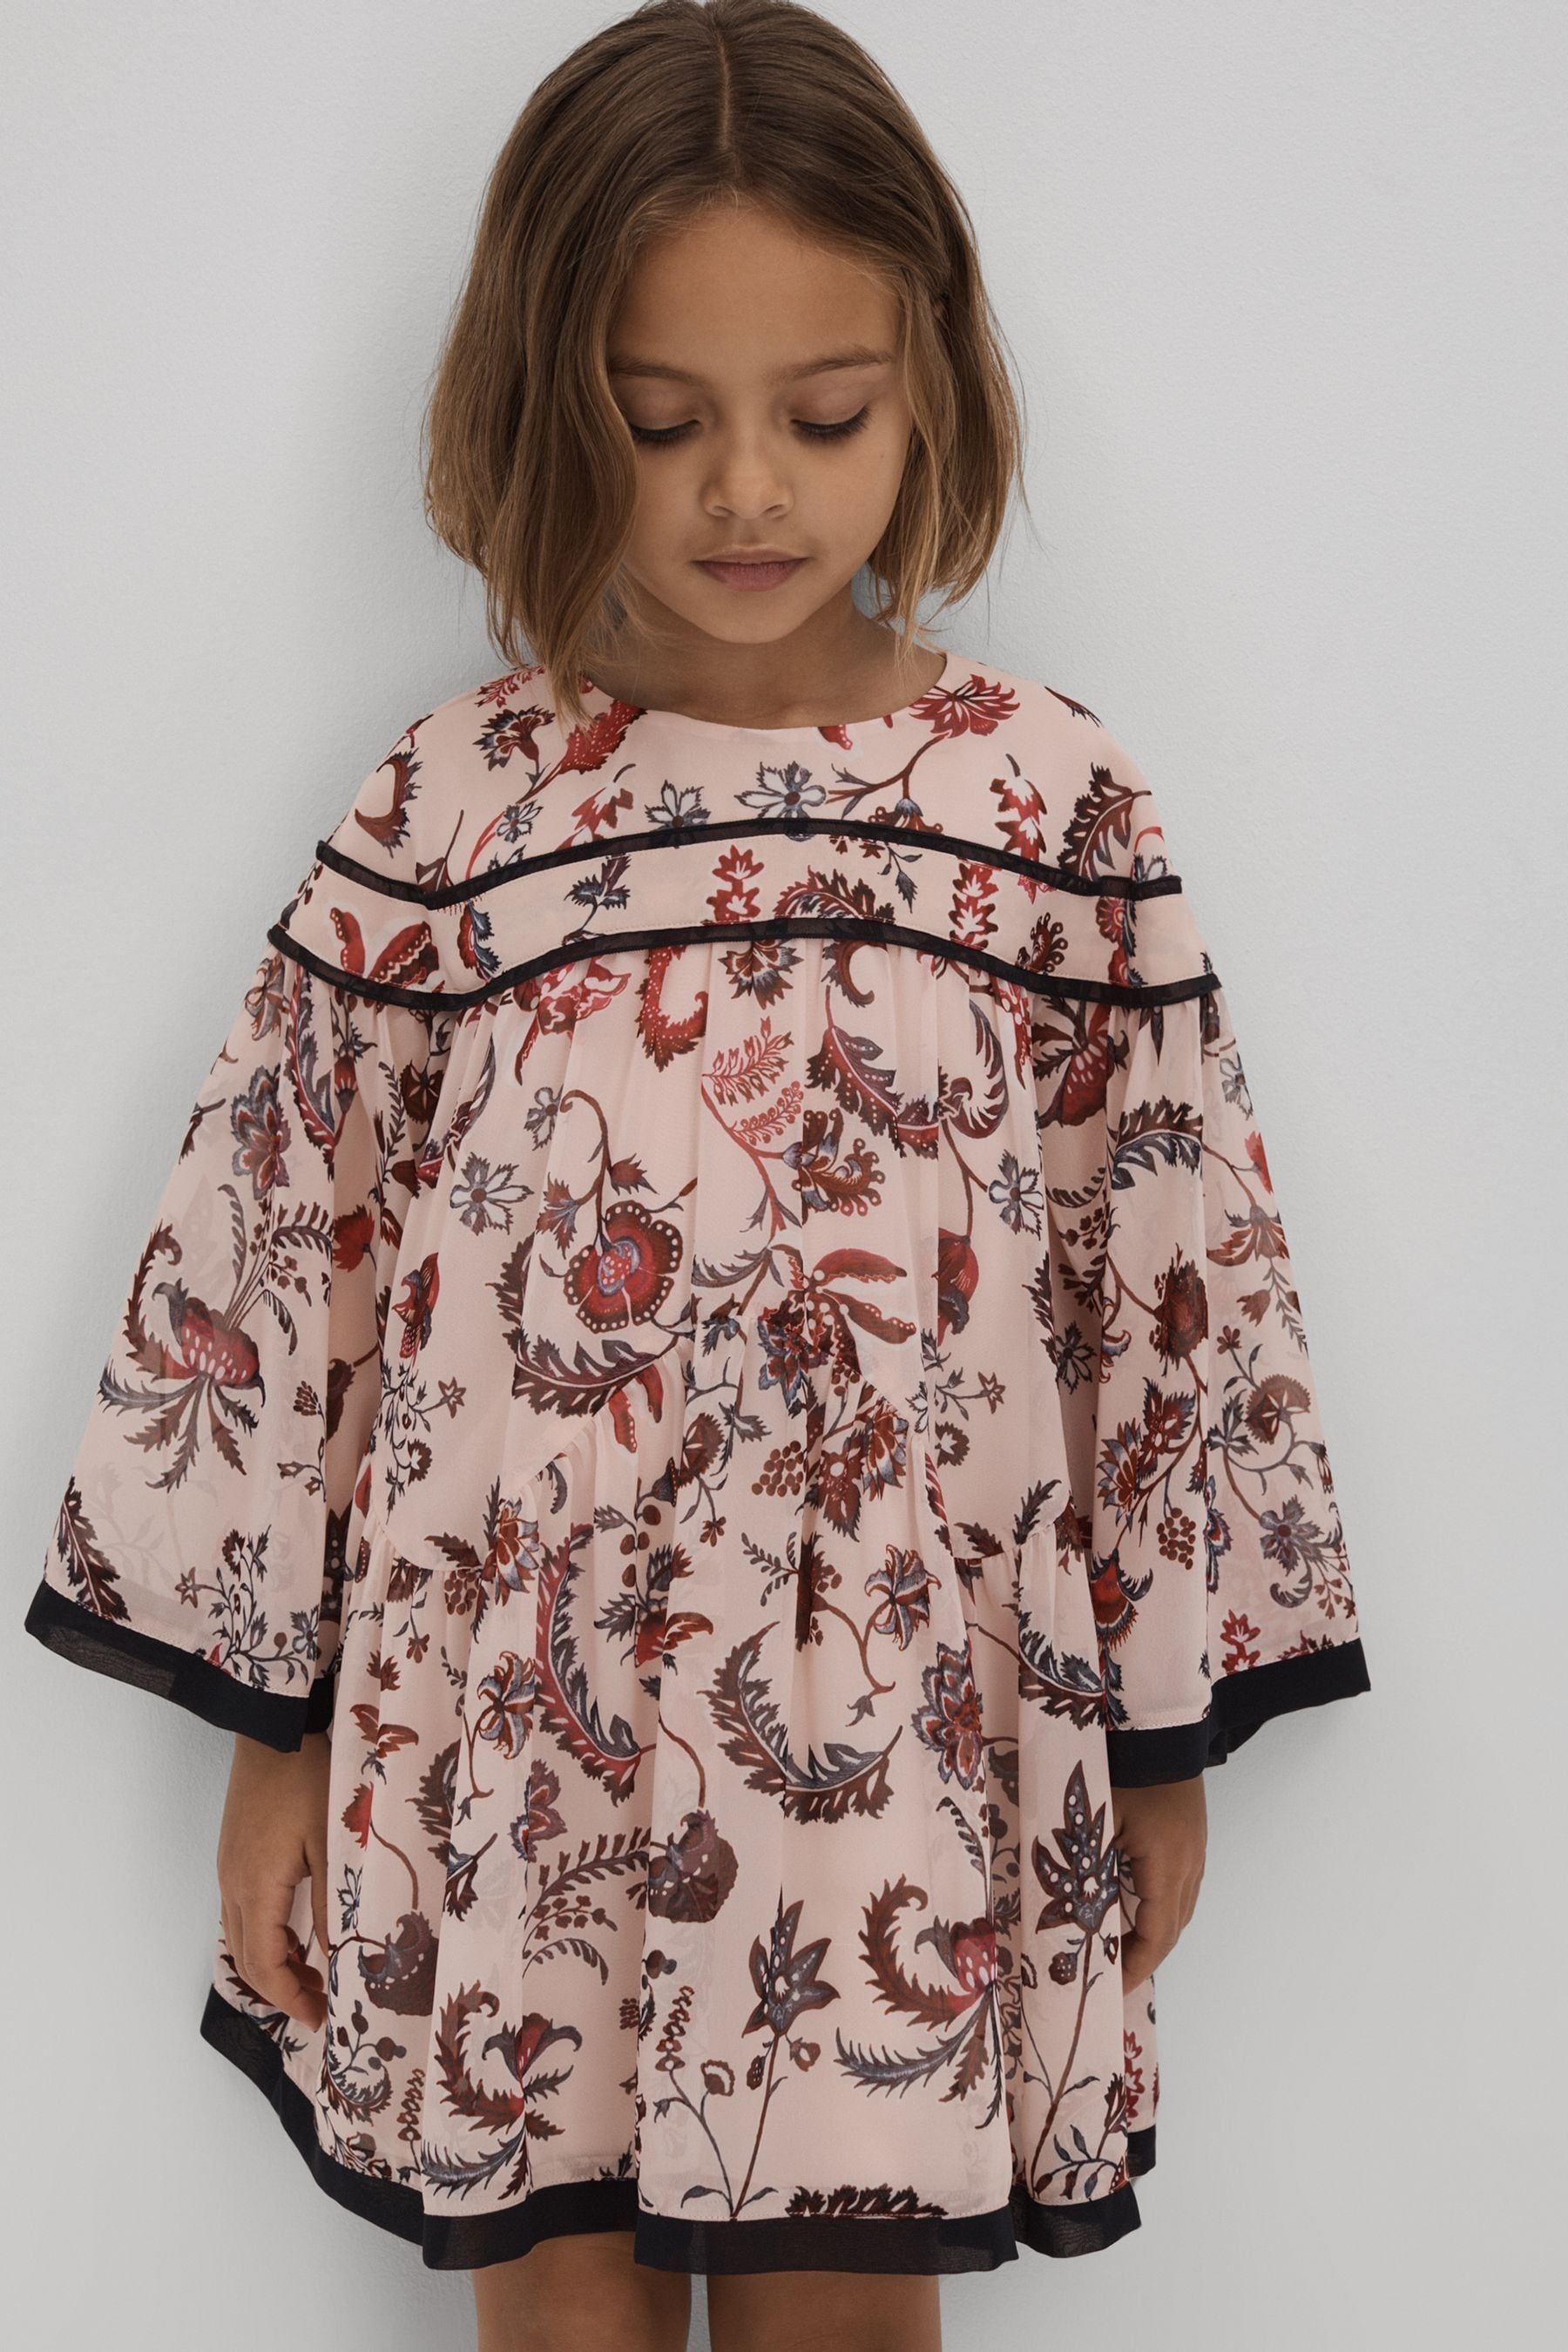 REISS TALITHA - PINK TEEN PRINTED BELL SLEEVE TIERED DRESS, UK 13-14 YRS